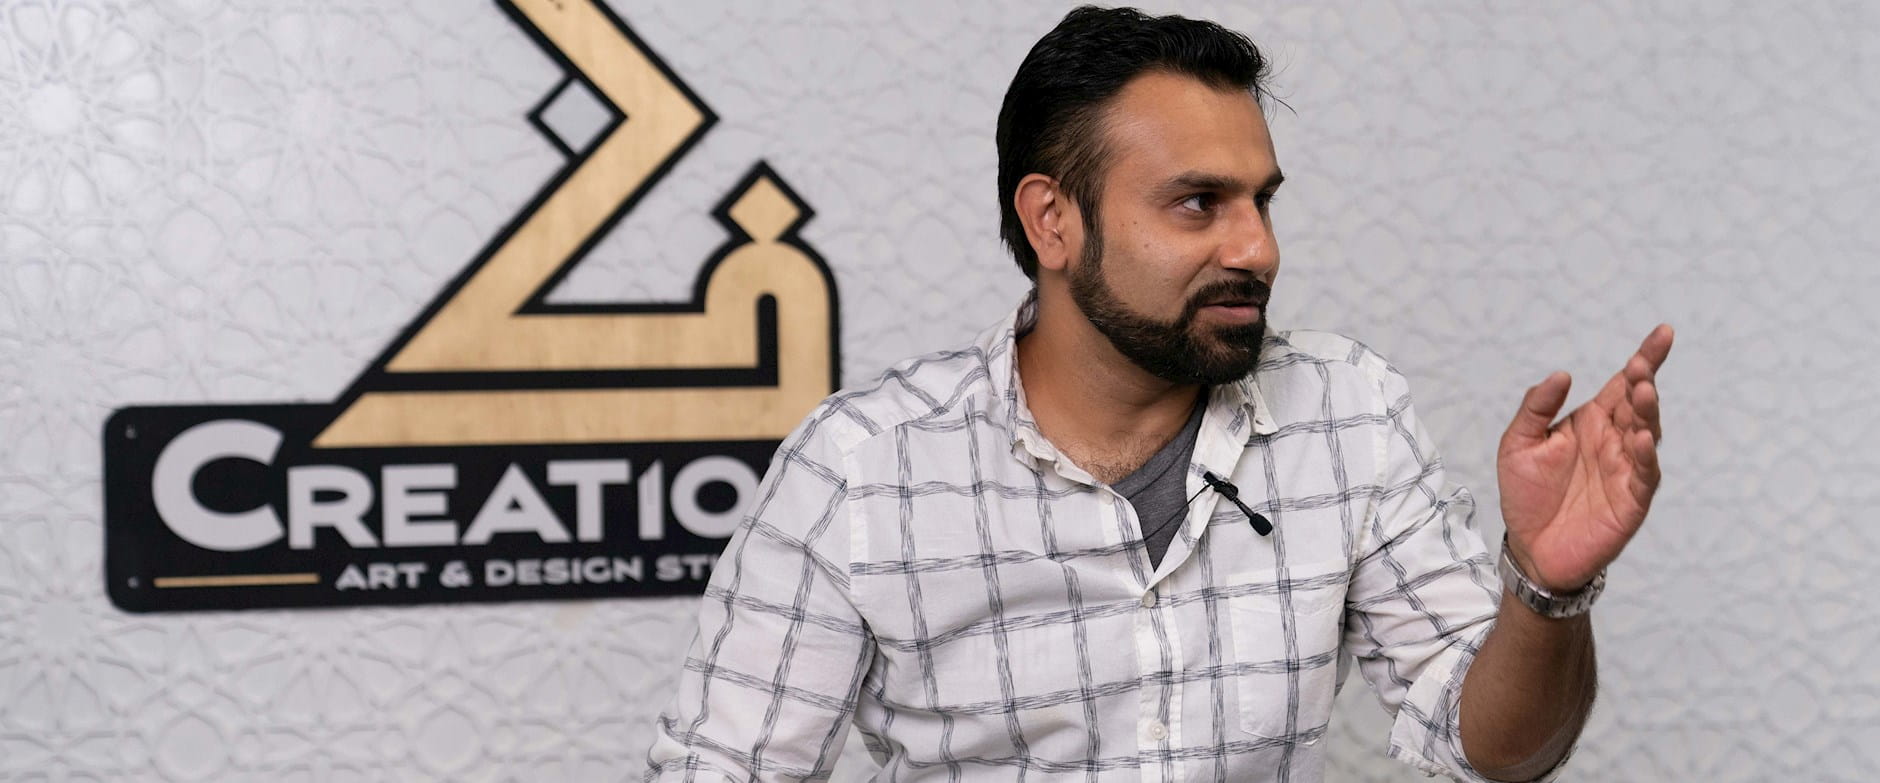 Zeeshan Farooq speaking in front of a sign for his "CreationZ" Art & Design Studio